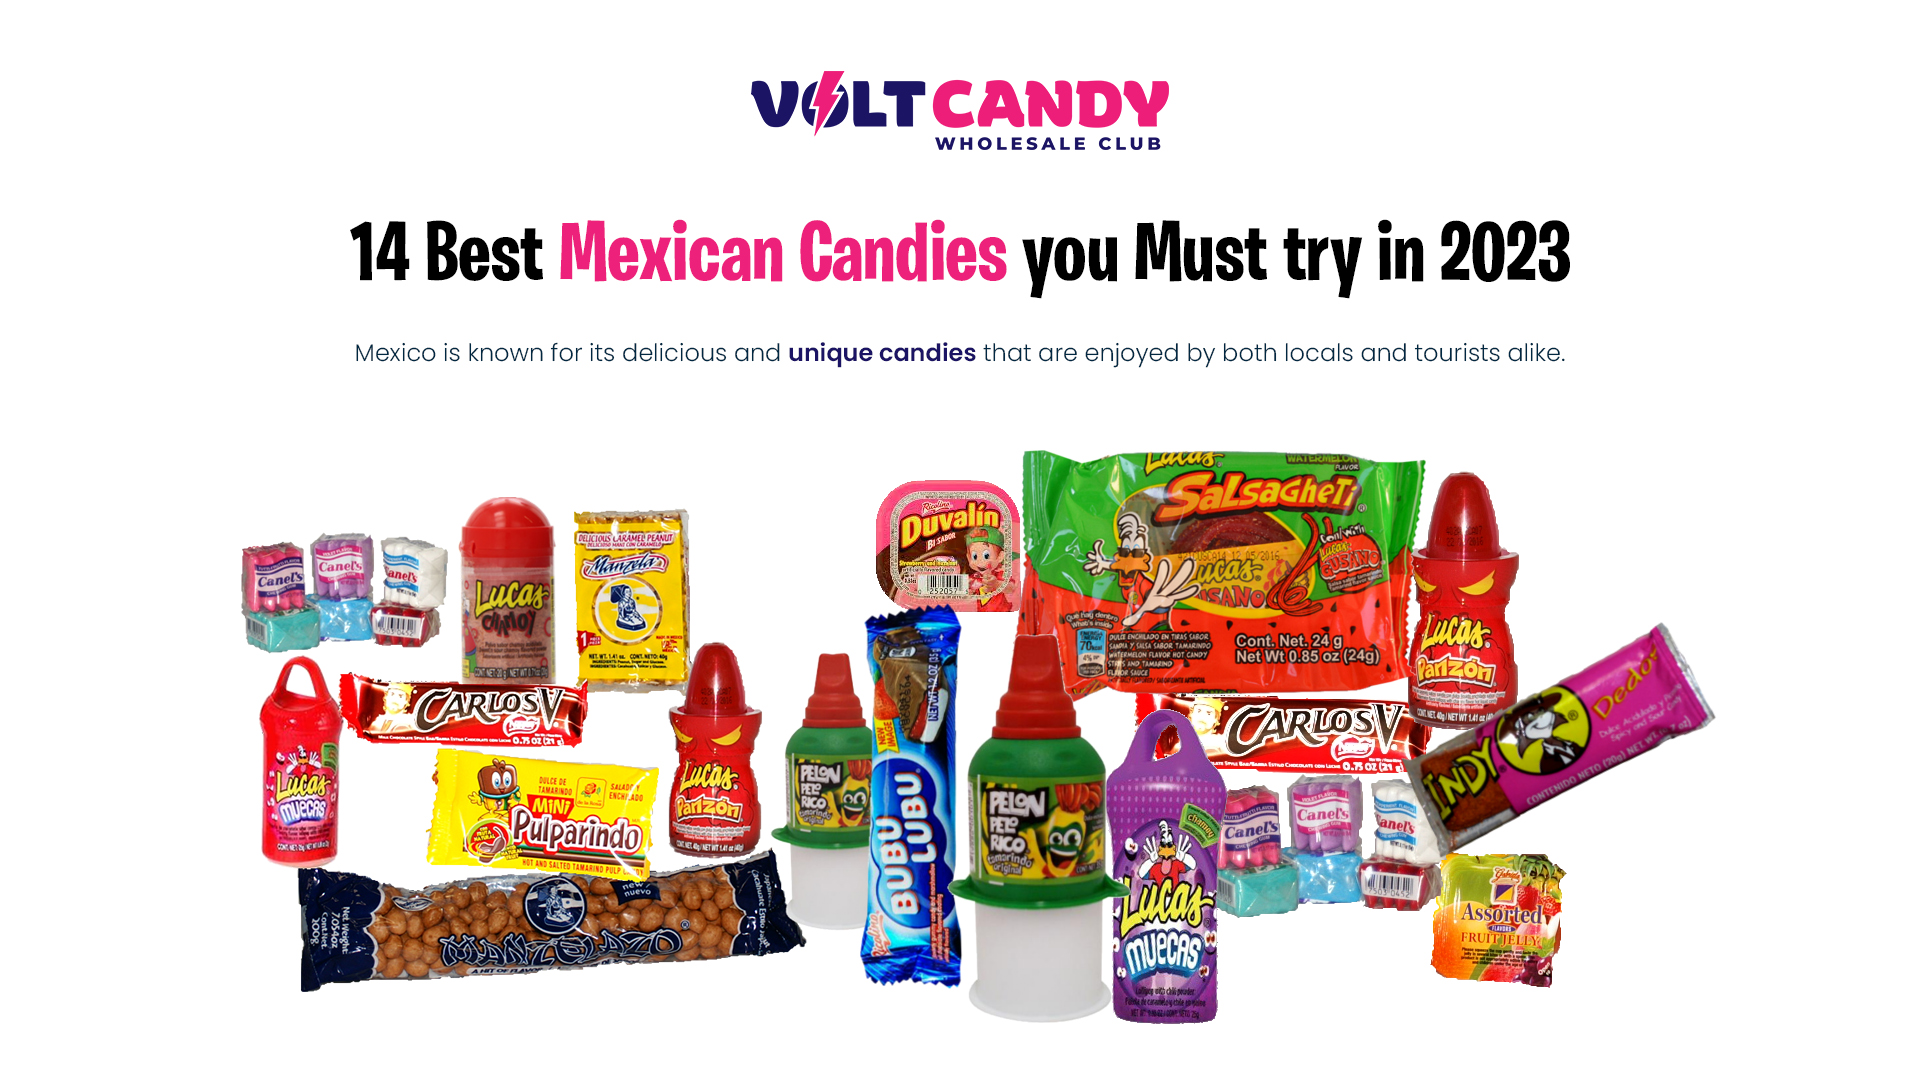 14 Best Mexican Candies 